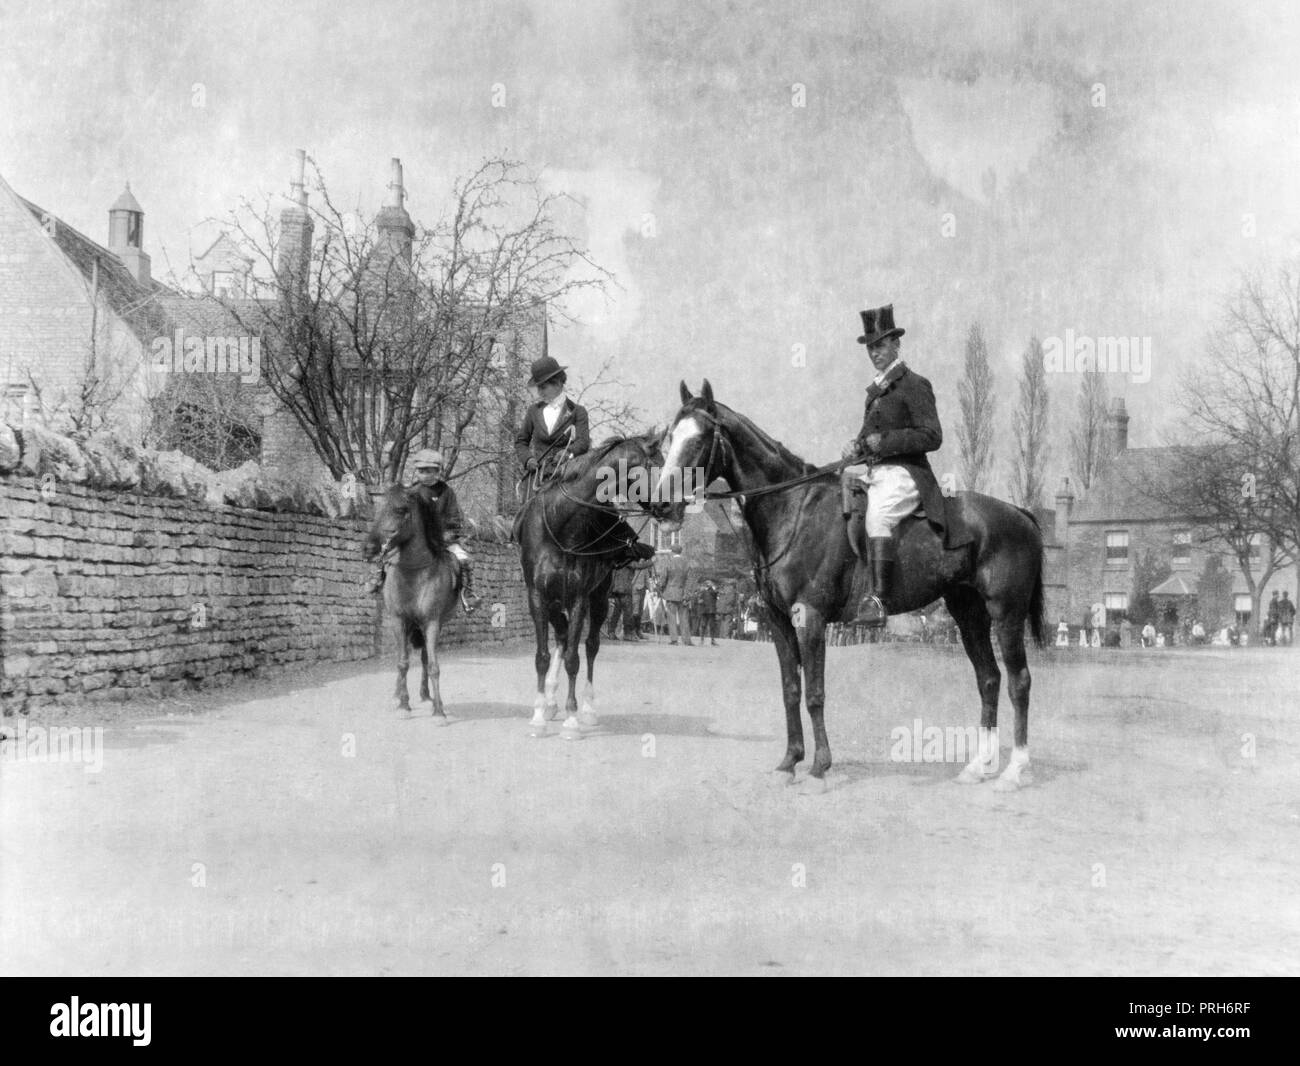 An early photograph showing a man and woman on horseback at the beginning of a foxhunt in an English town. Stock Photo